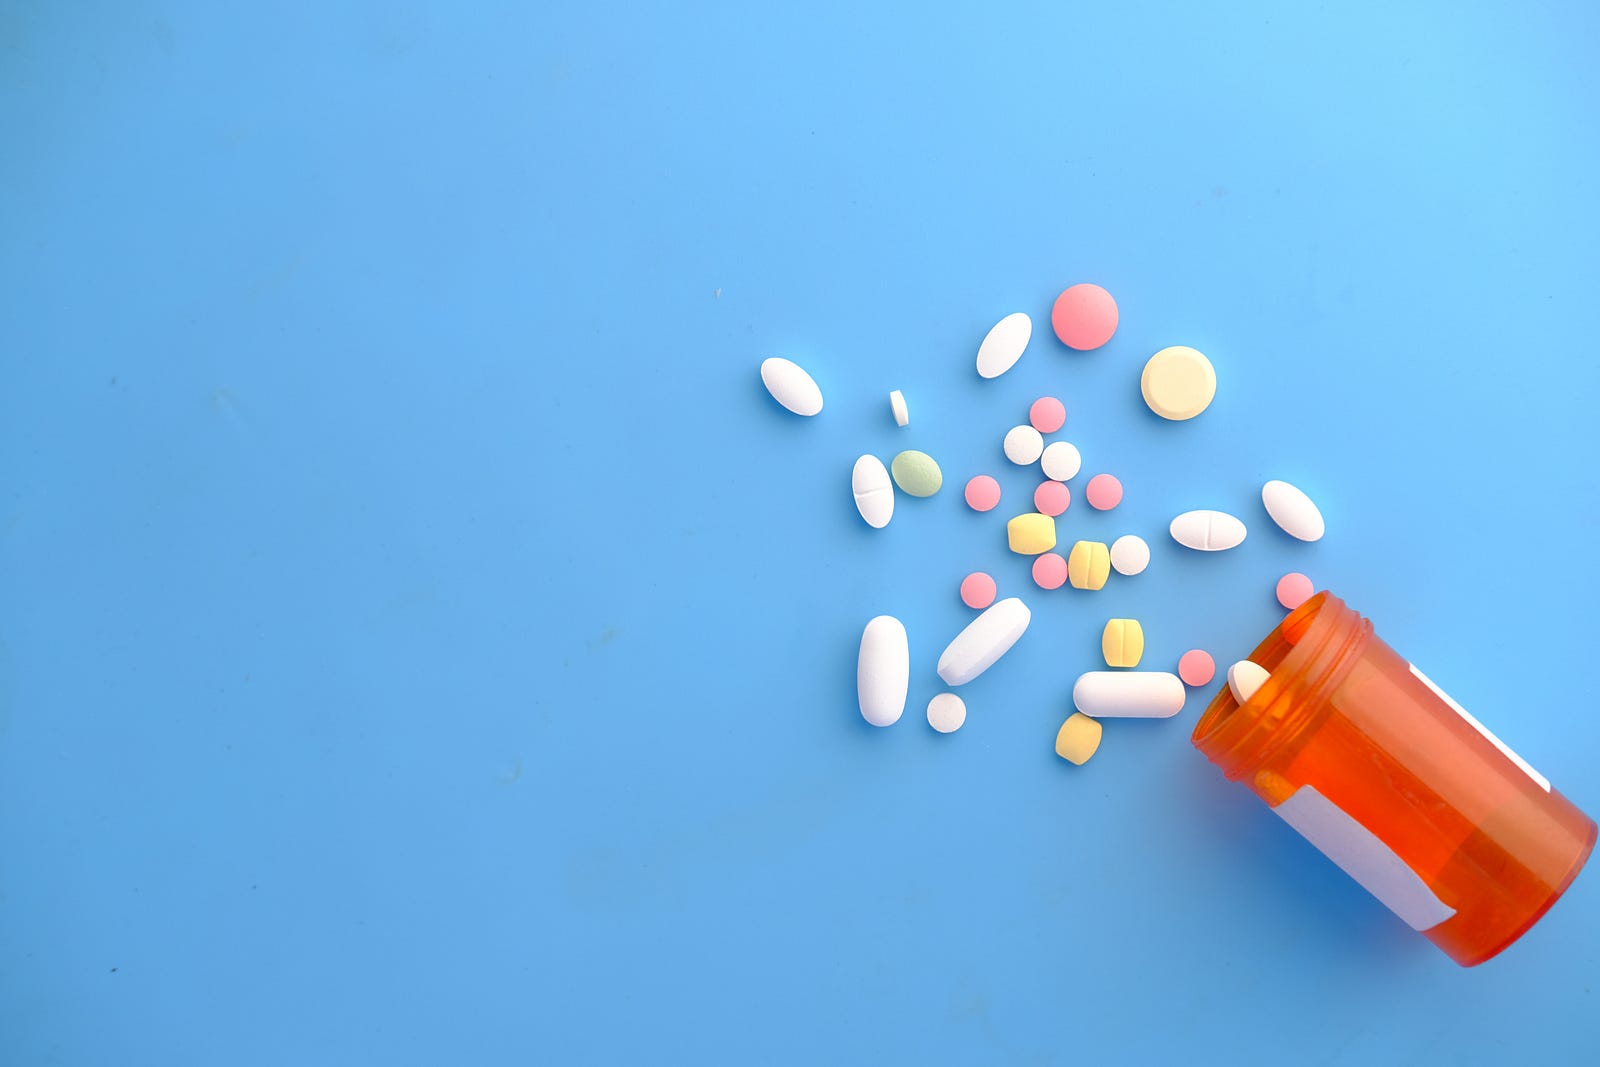 A bottle (in the lower right part of the picture) spills out multiple pills, of various shapes, sizes, and colors. Light blue background. Frequent sleep medicine use is associated with a higher dementia risk.